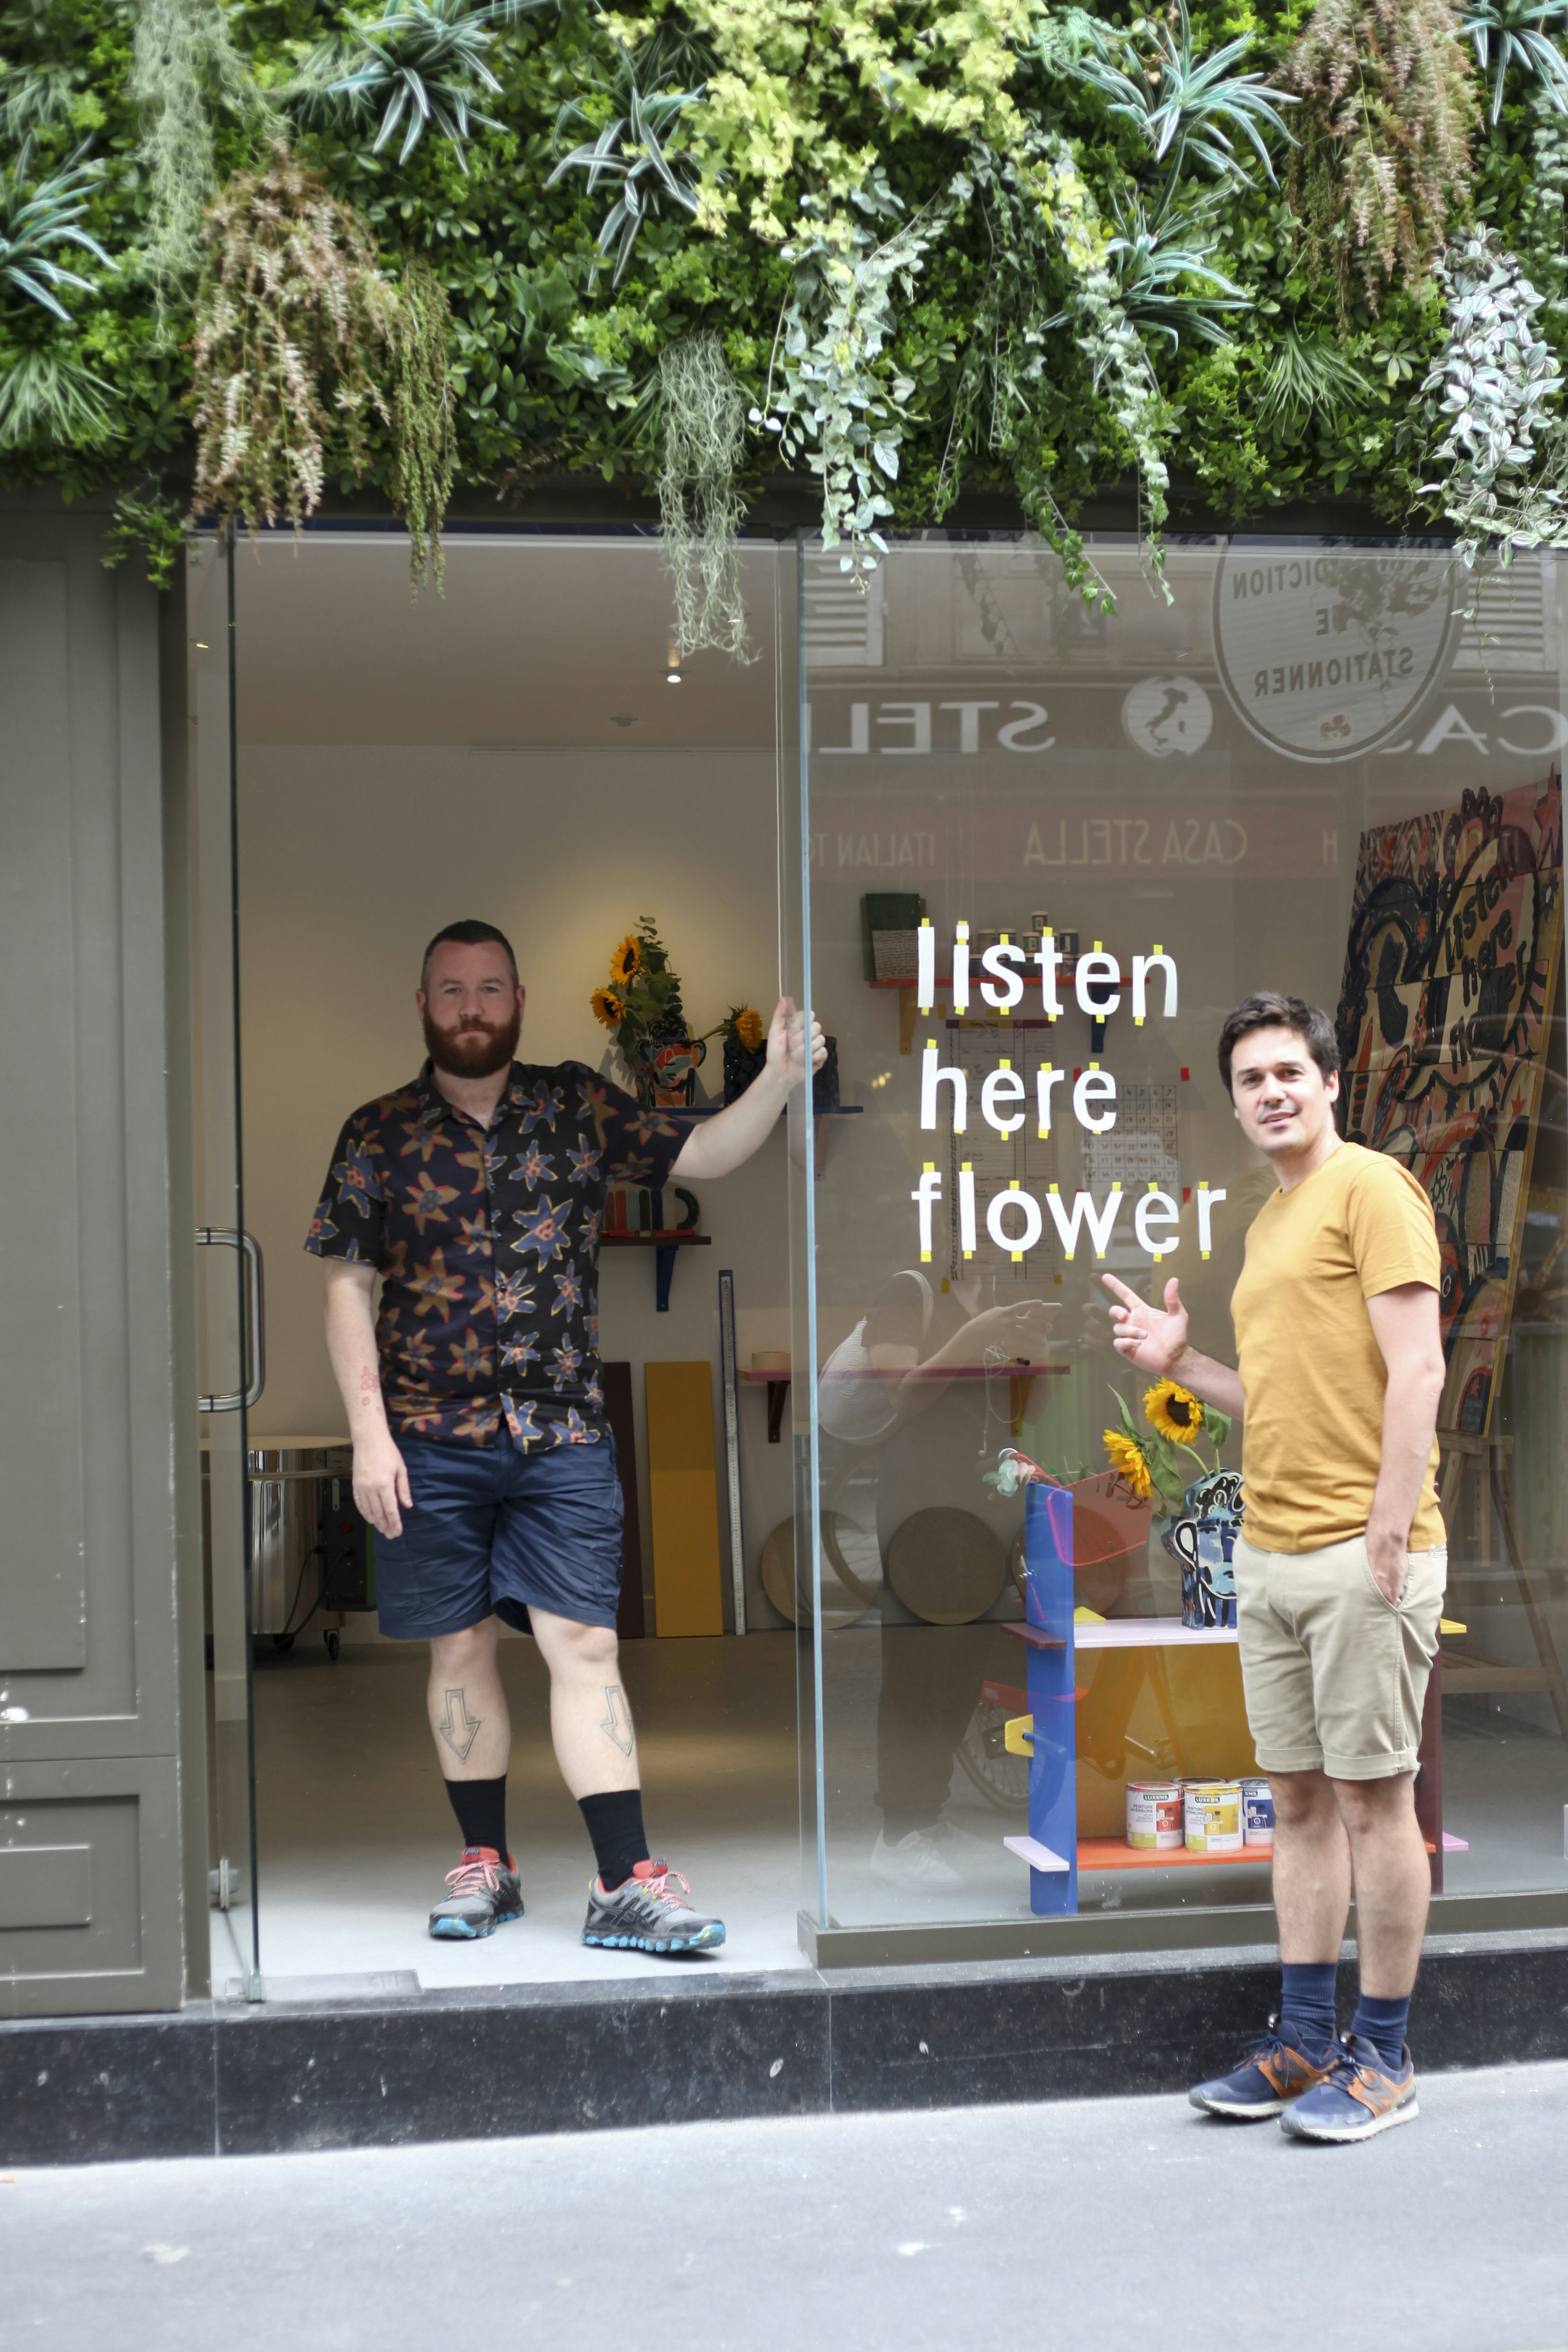 John Booth and Matthew Raw stand in the entrance of a gallery with the words ‘listen here flower’ on the window